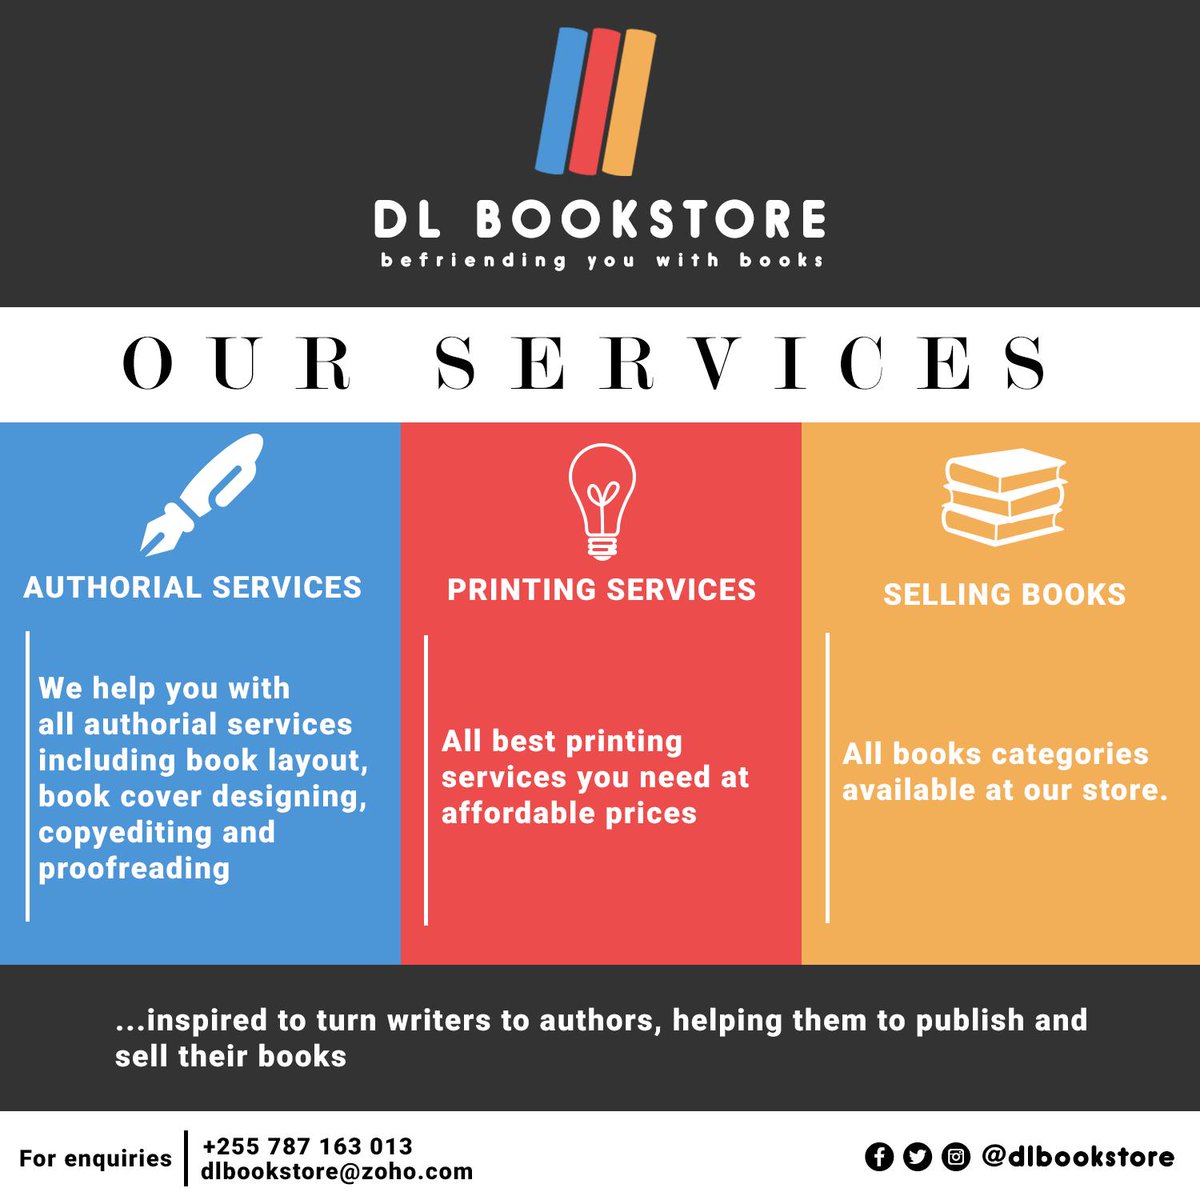 Inspired to turn writers to authors, helping them to  publish and sell their books. For enquiries | +255 787 163 013.
.
.

#bookstagram #book_readers #services #dlbookstore #books #bookworms #printingbooks #authorhangout #authorial #sellingbooks #writers #authors